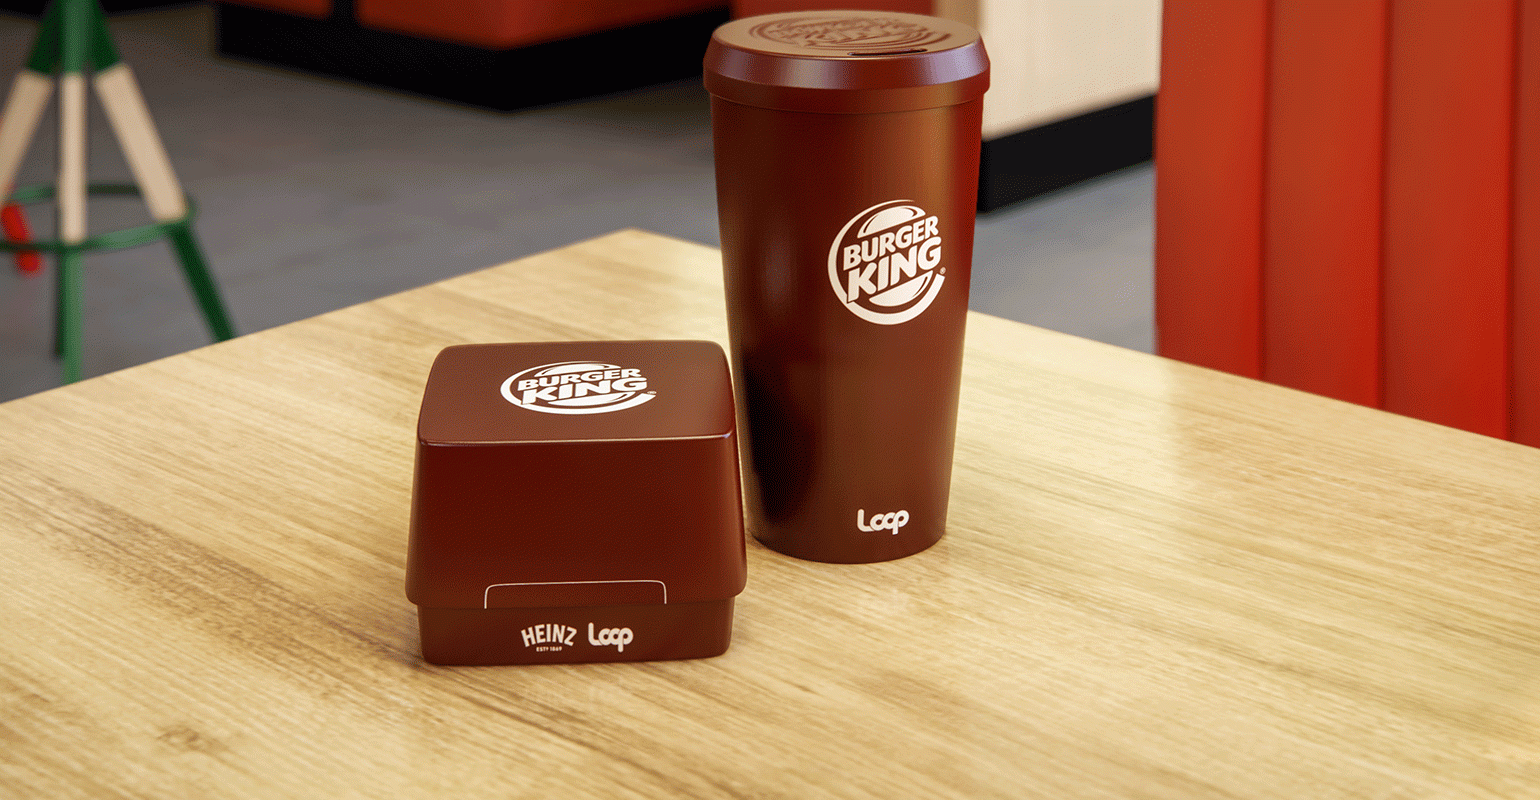 https://www.nrn.com/sites/nrn.com/files/styles/article_featured_retina/public/burger-king_reusable_containers.gif?itok=0dHSOMxA